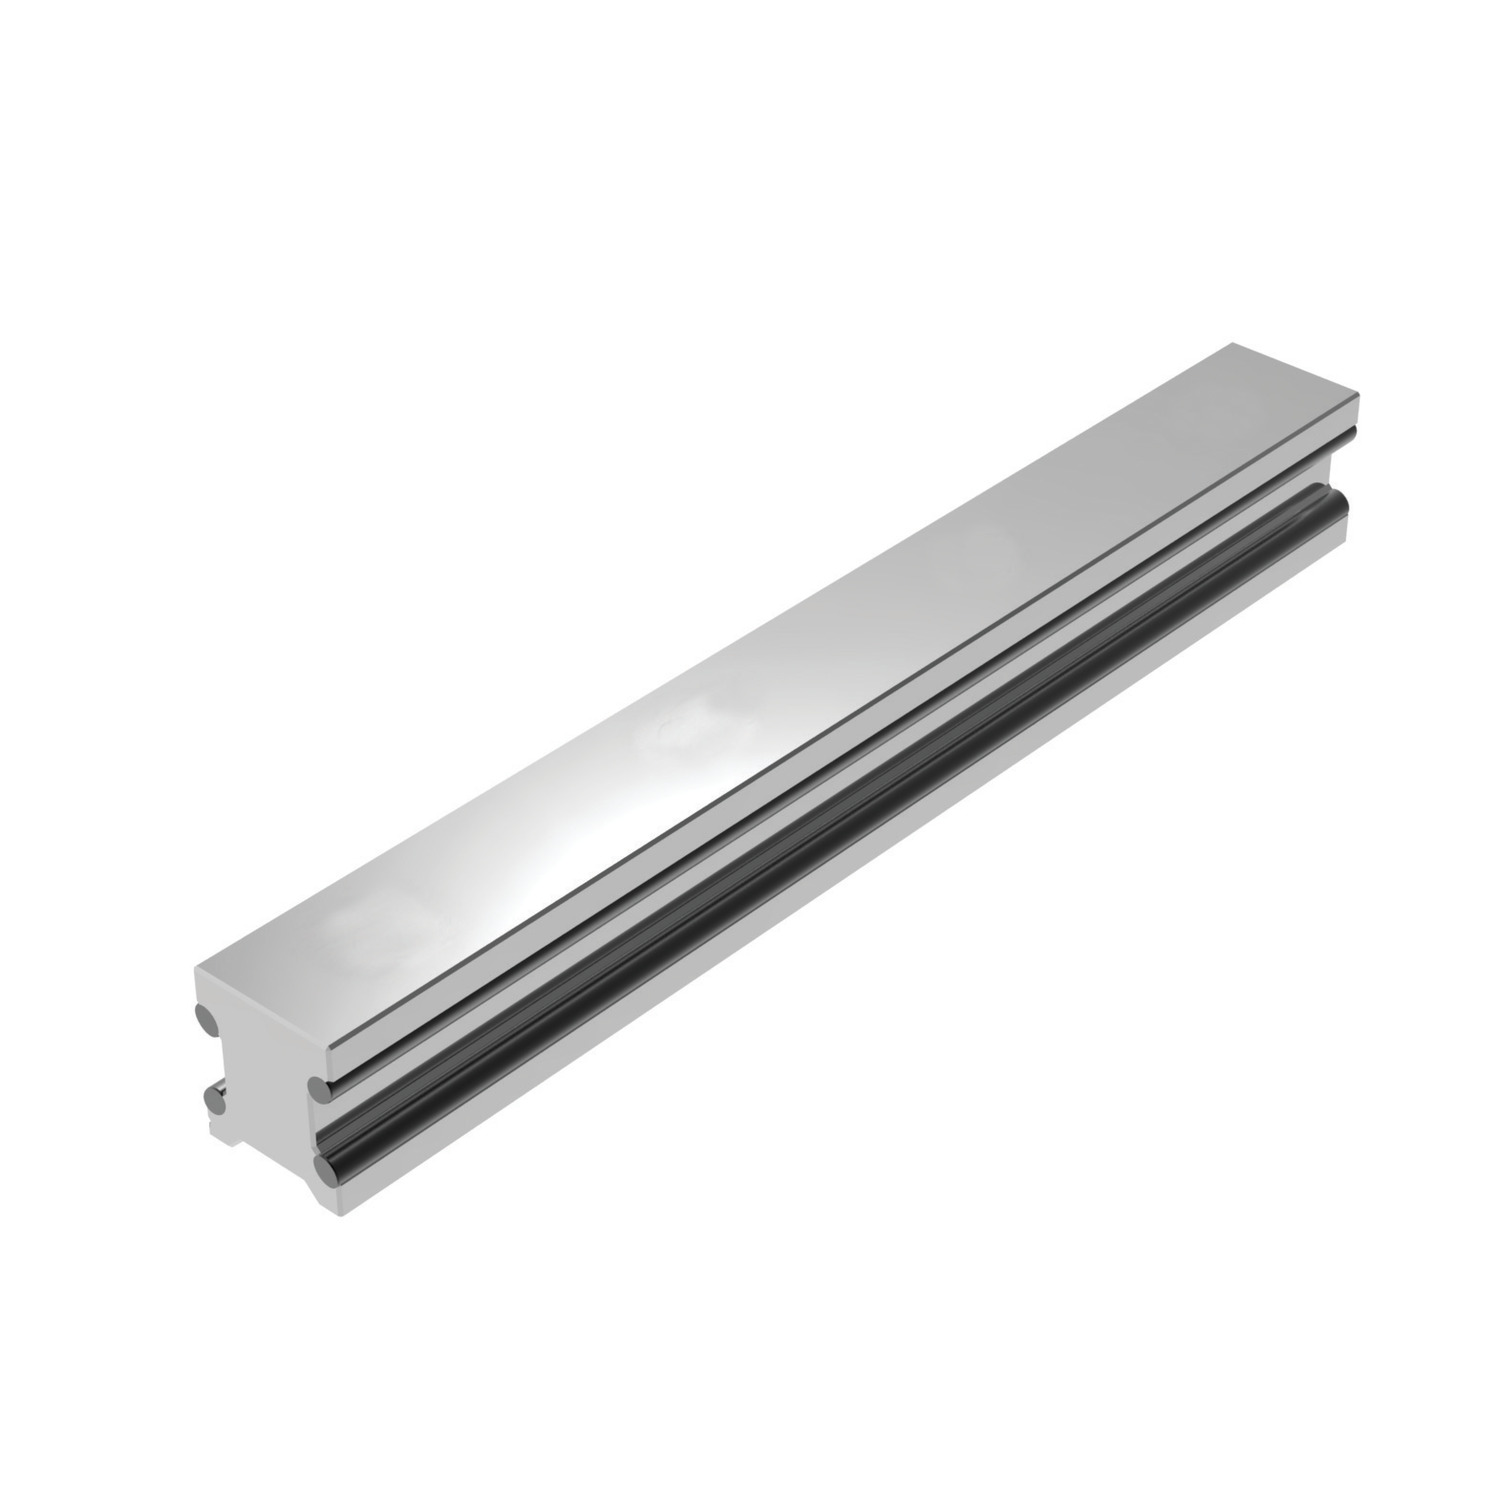 15mm Aluminium Linear Guide Rail Rear fixing aluminium linear rail: 15, 20 and 25mm. Aluminium alloy (AlMgSi0.5) with hardened stainless steel inserts (X46Cr13) for added durability. Steel versions also available.